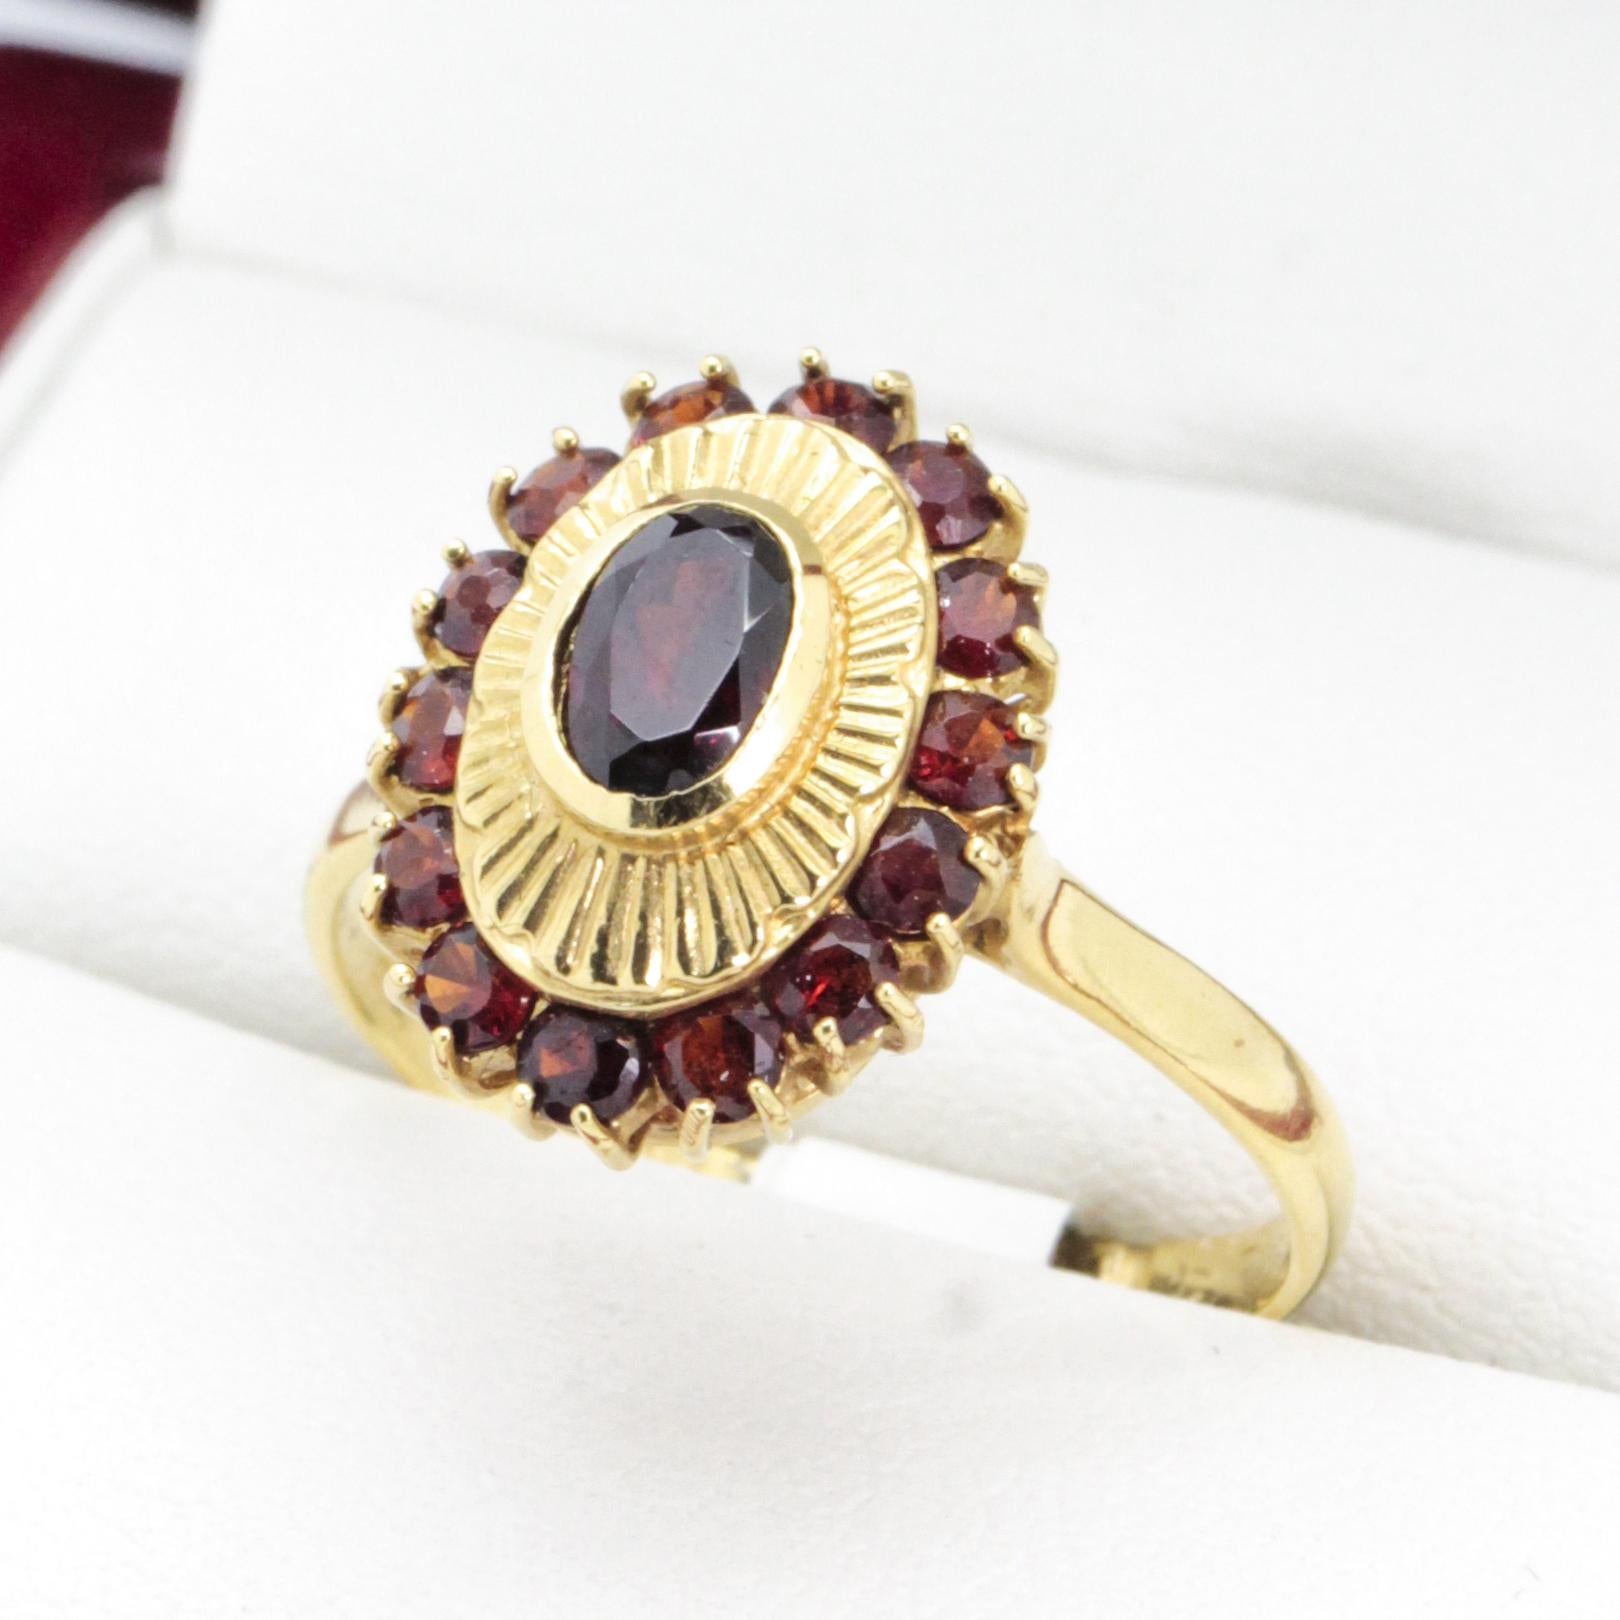 This 18ct yellow gold 15 stone Garnet cluster ring, features an Oval Garnet rub over set with grooved surround and an outer edge claw and grip set.

14 round Garnets on a swept up shoulder 1/4 round 2.27mm band.

The centre Garment measures 5.95 x